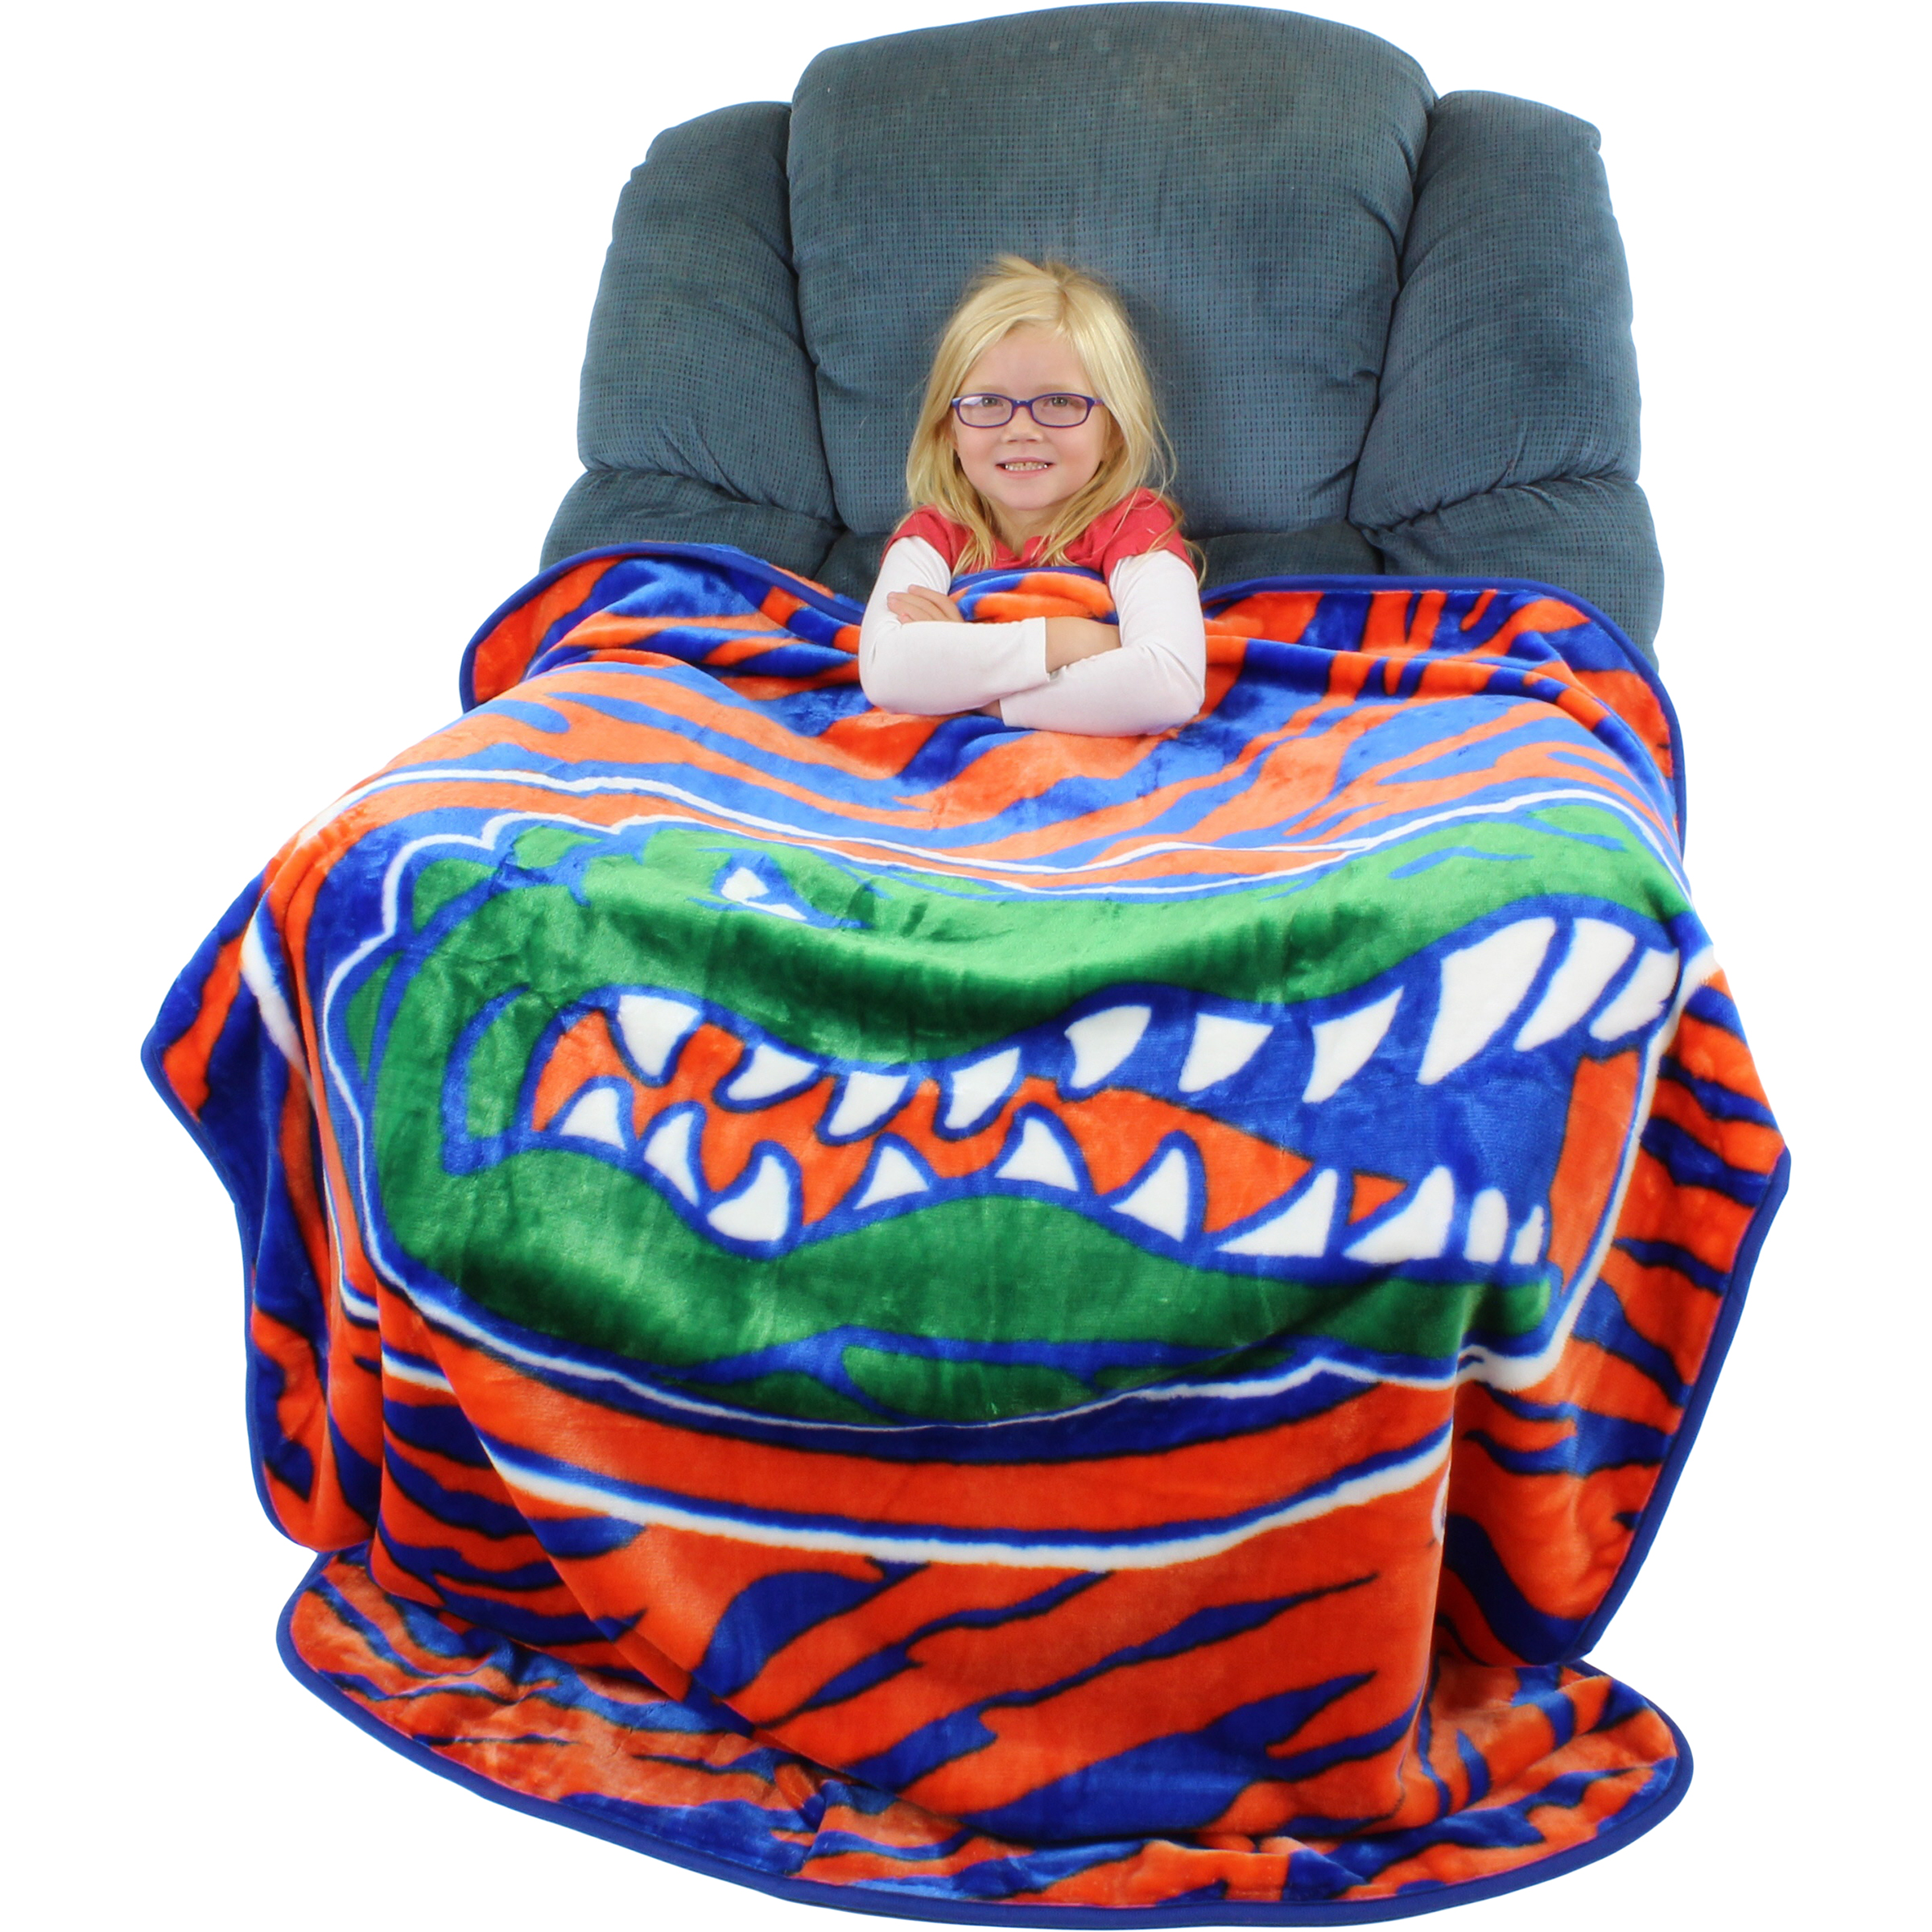 College Covers Everything Comfy Florida Gators Soft Raschel Throw Blanket, 60" x 50" - image 2 of 6